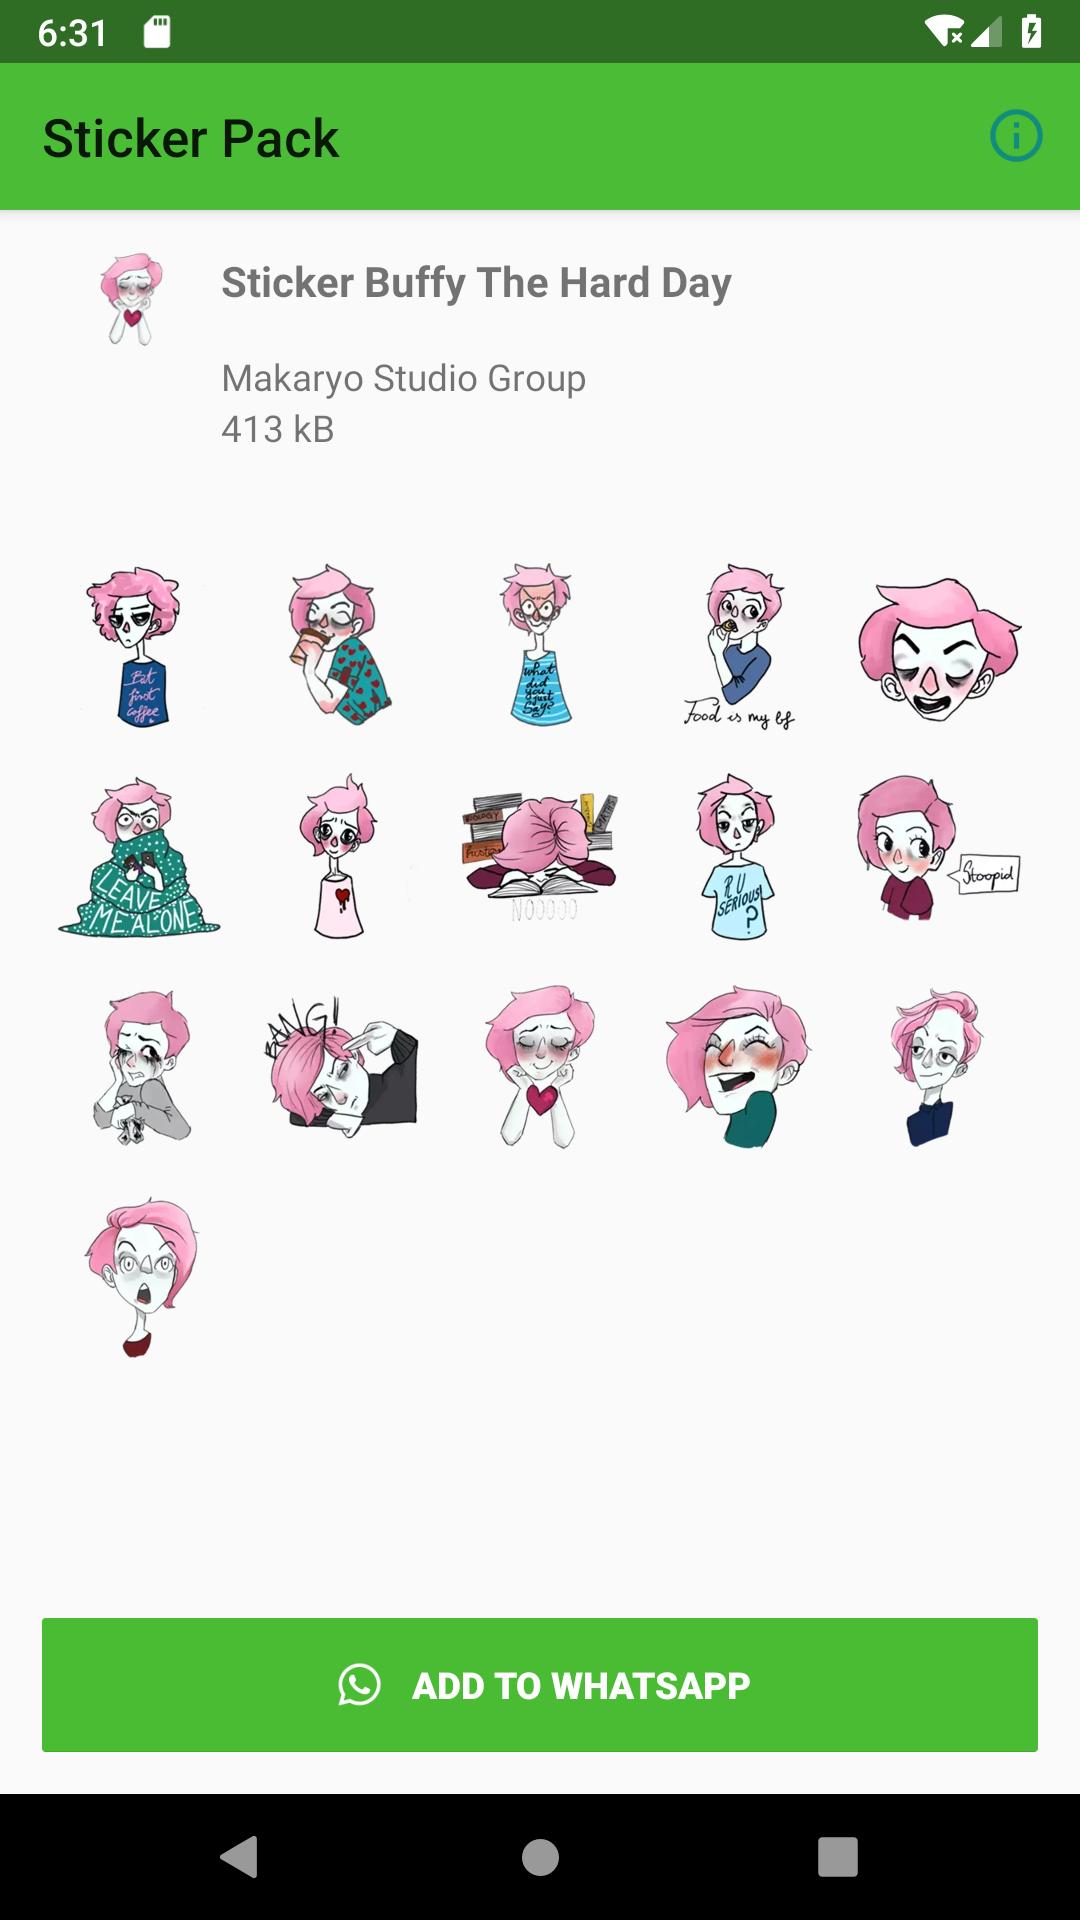 Best Wastickerapps Bts Rm Kpop Sticker Pack 2019 For Android Apk